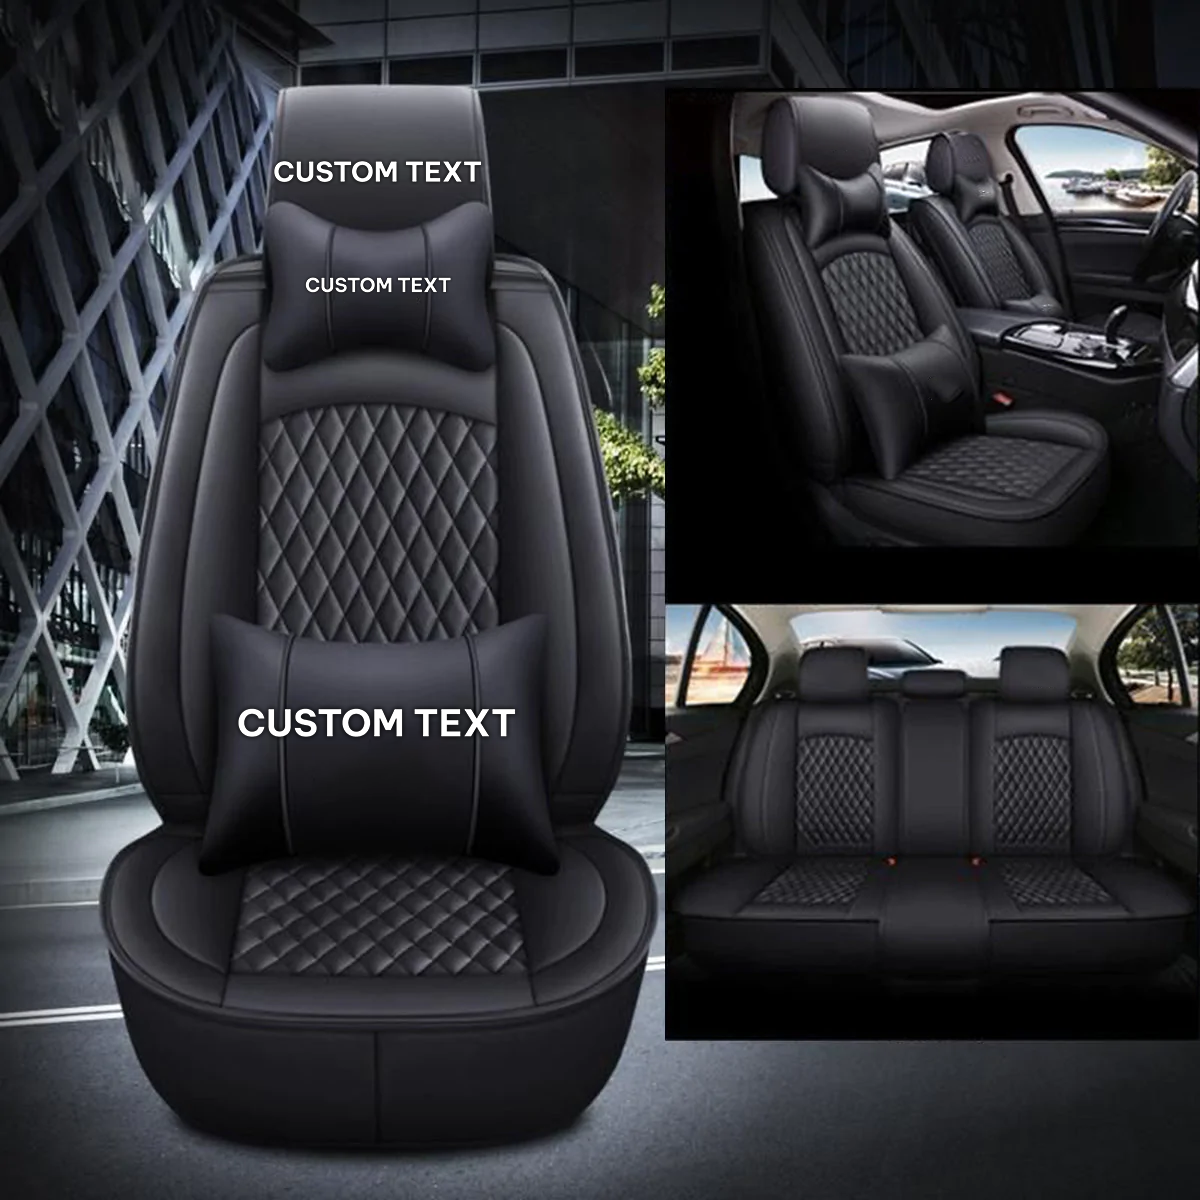 Custom Text For Seat Covers 5 Seats Full Set, Custom Fit For Your Cars, Leatherette Automotive Seat Cushion Protector Universal Fit, Vehicle Auto Interior Decor PE13988